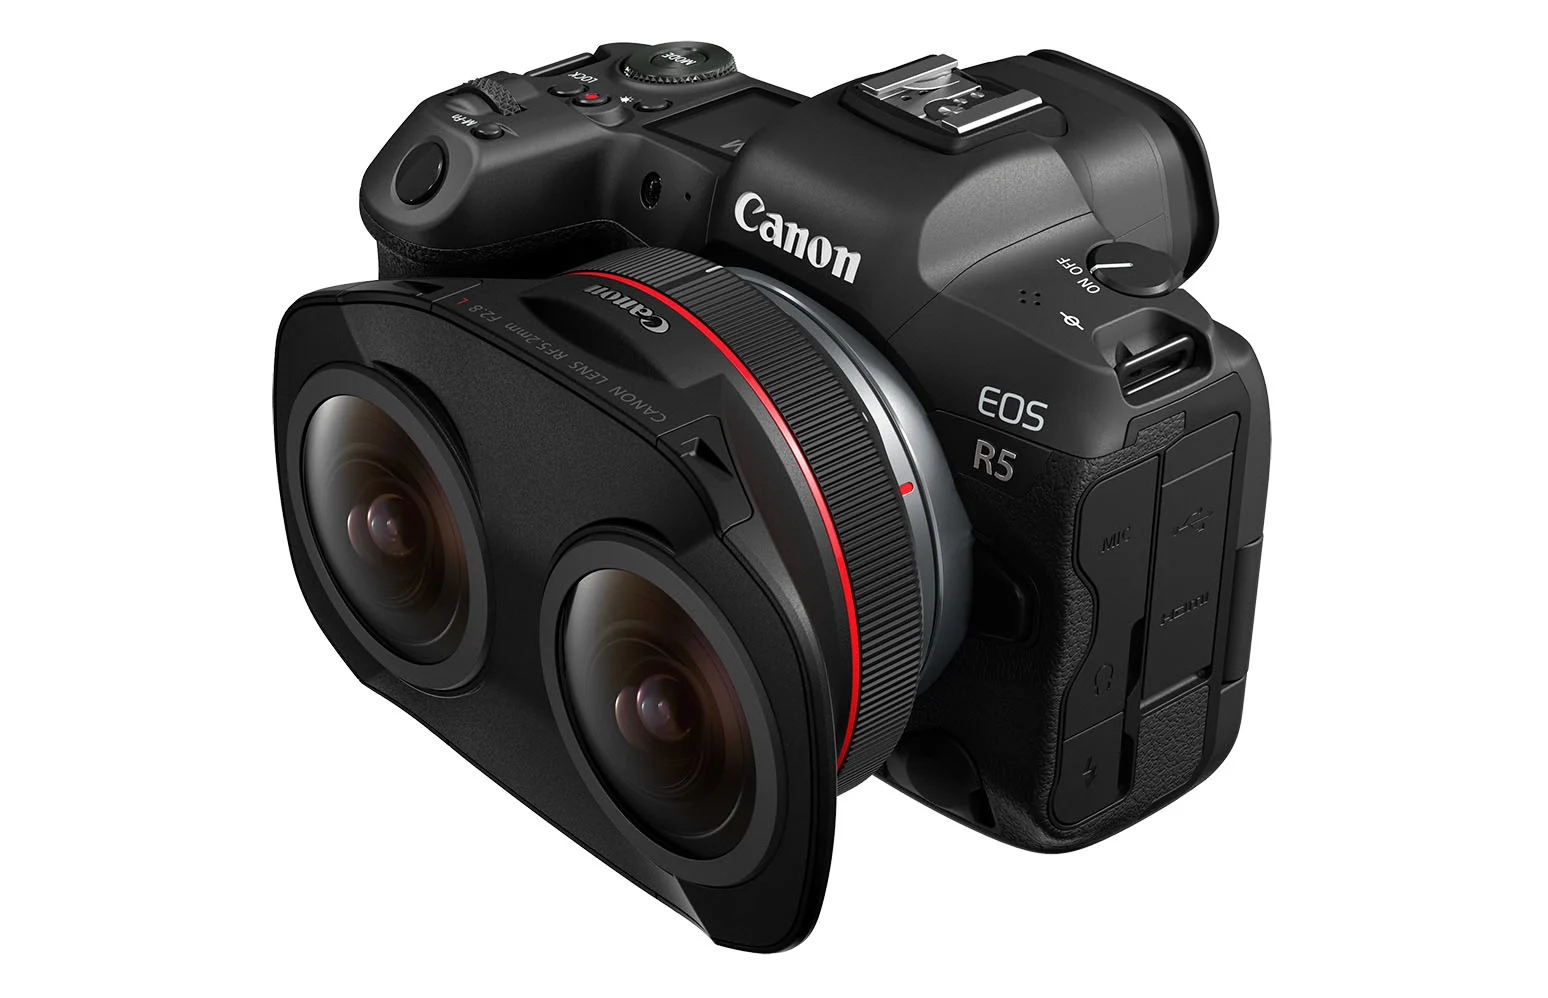 Canon created a dual fisheye lens for its new VR video system